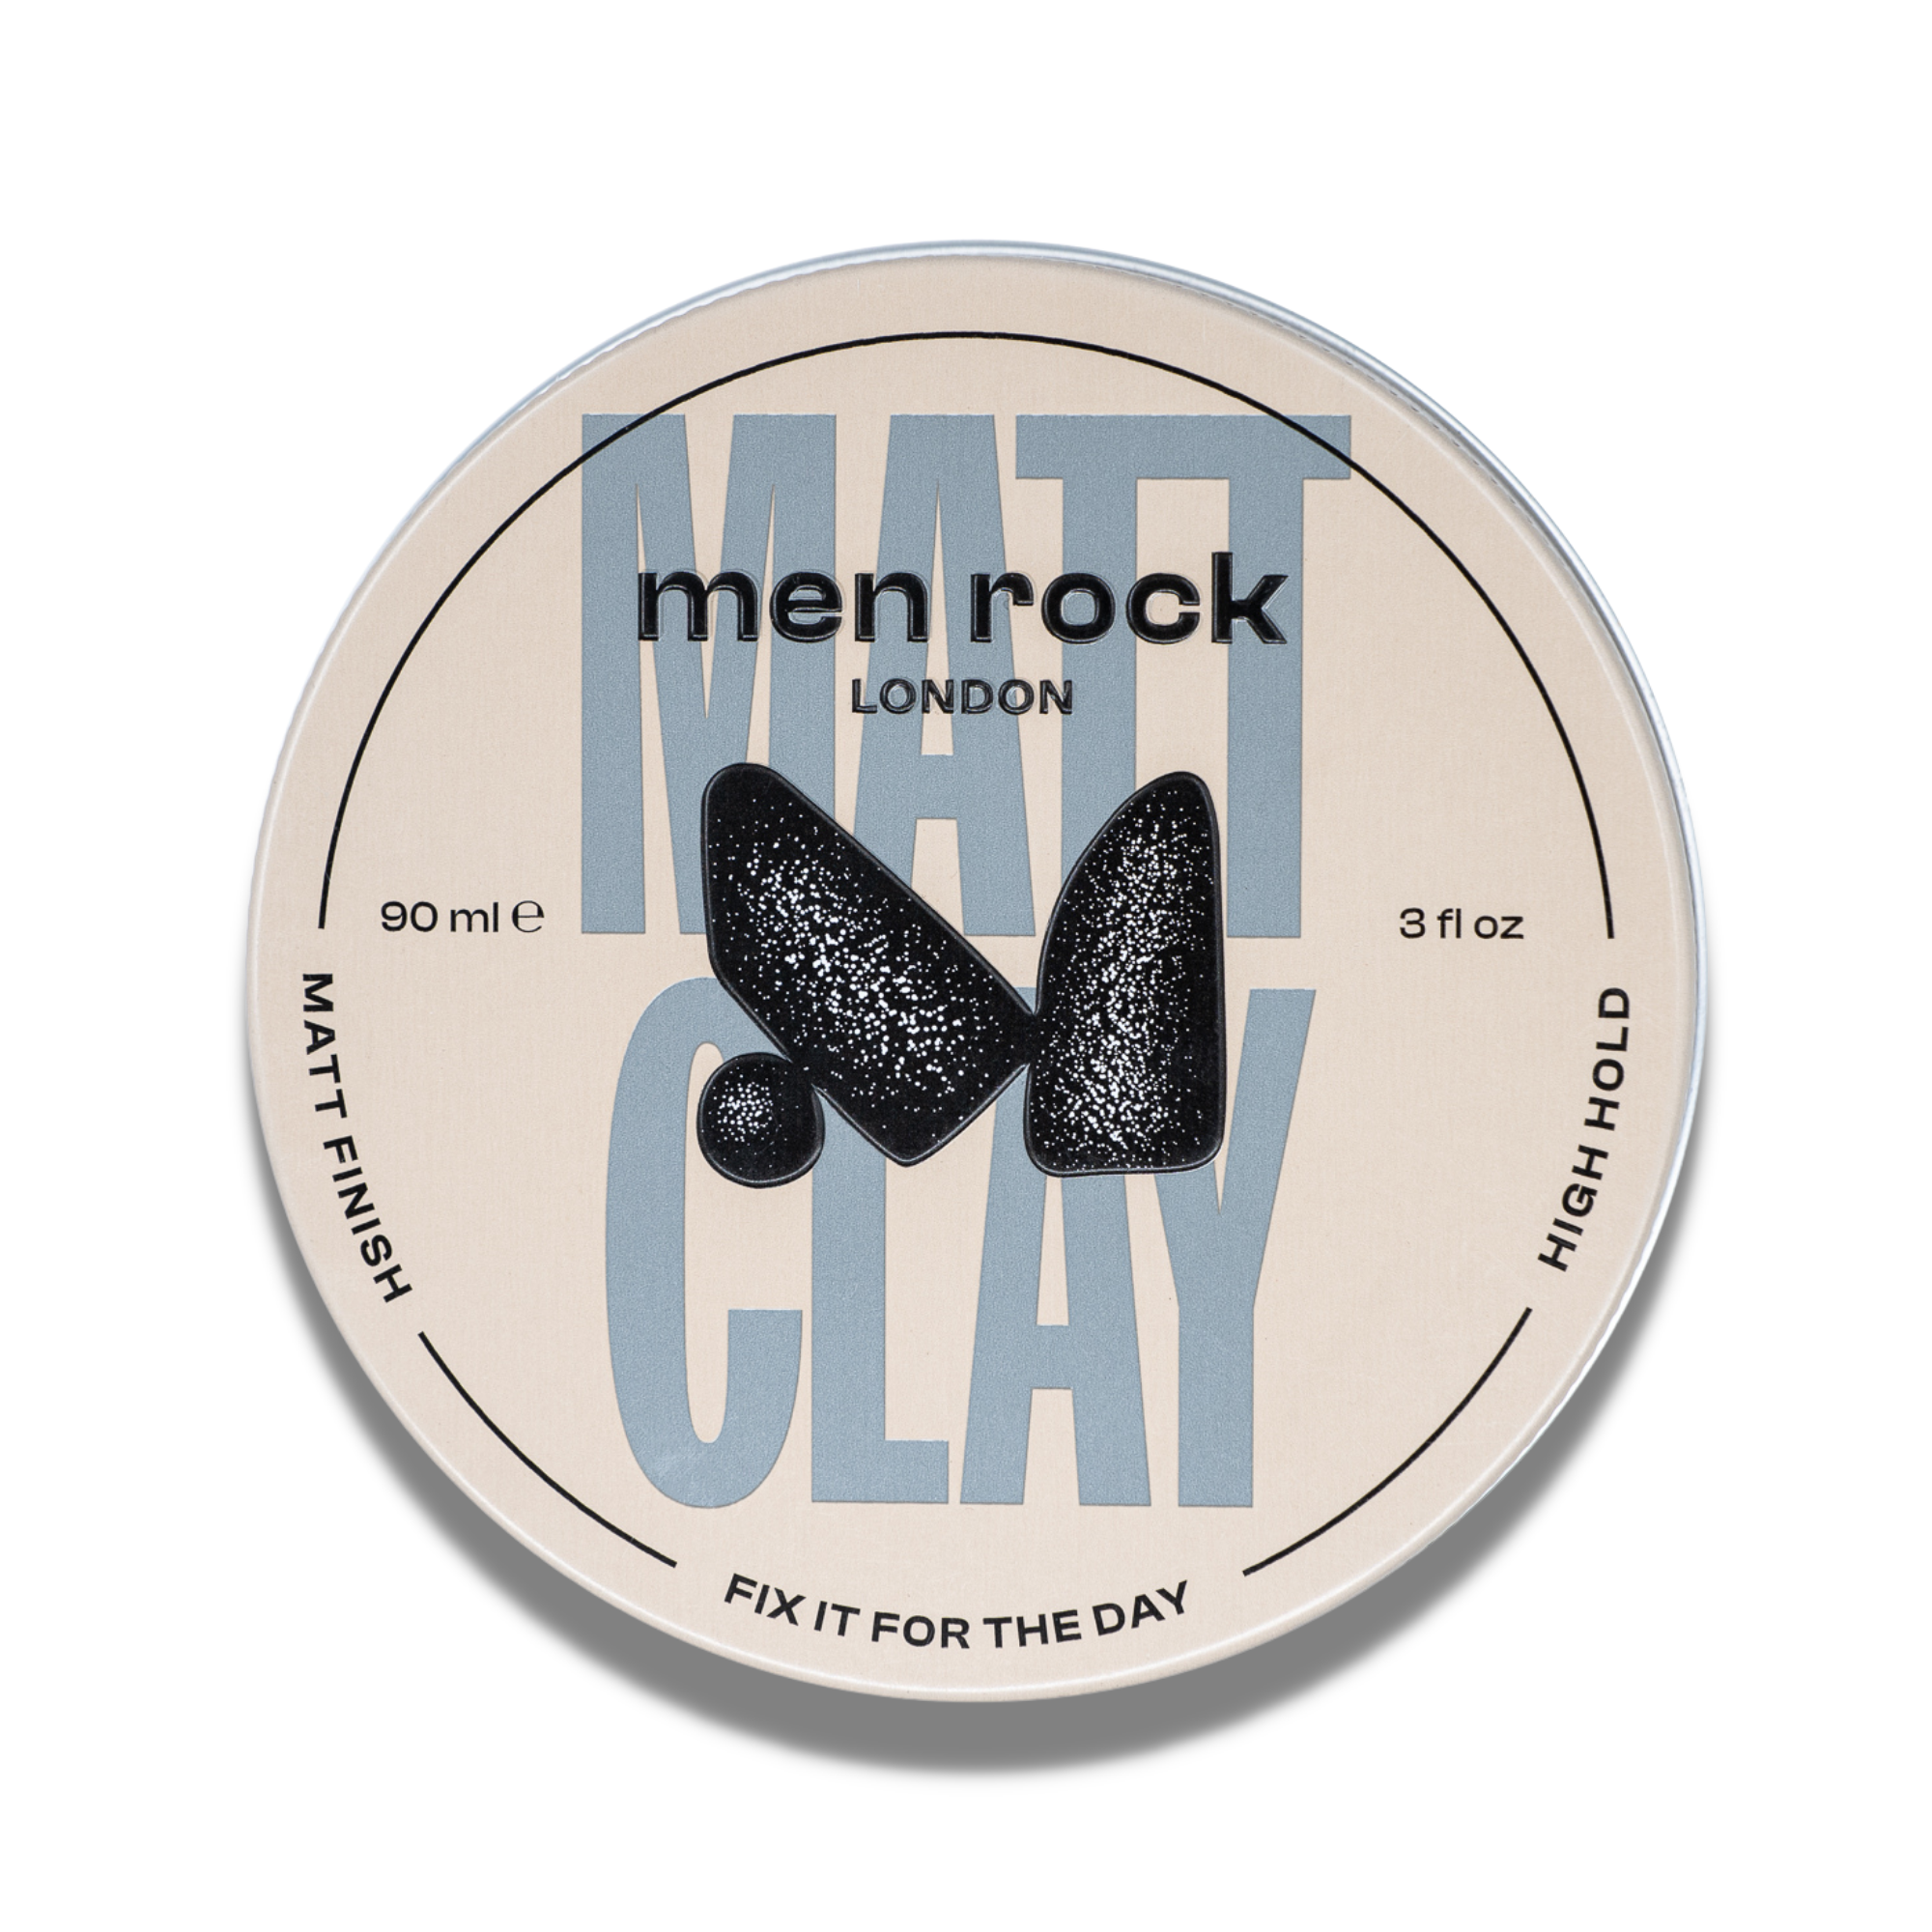 Matt Clay hair styling product for men offering matt finish and high hold 